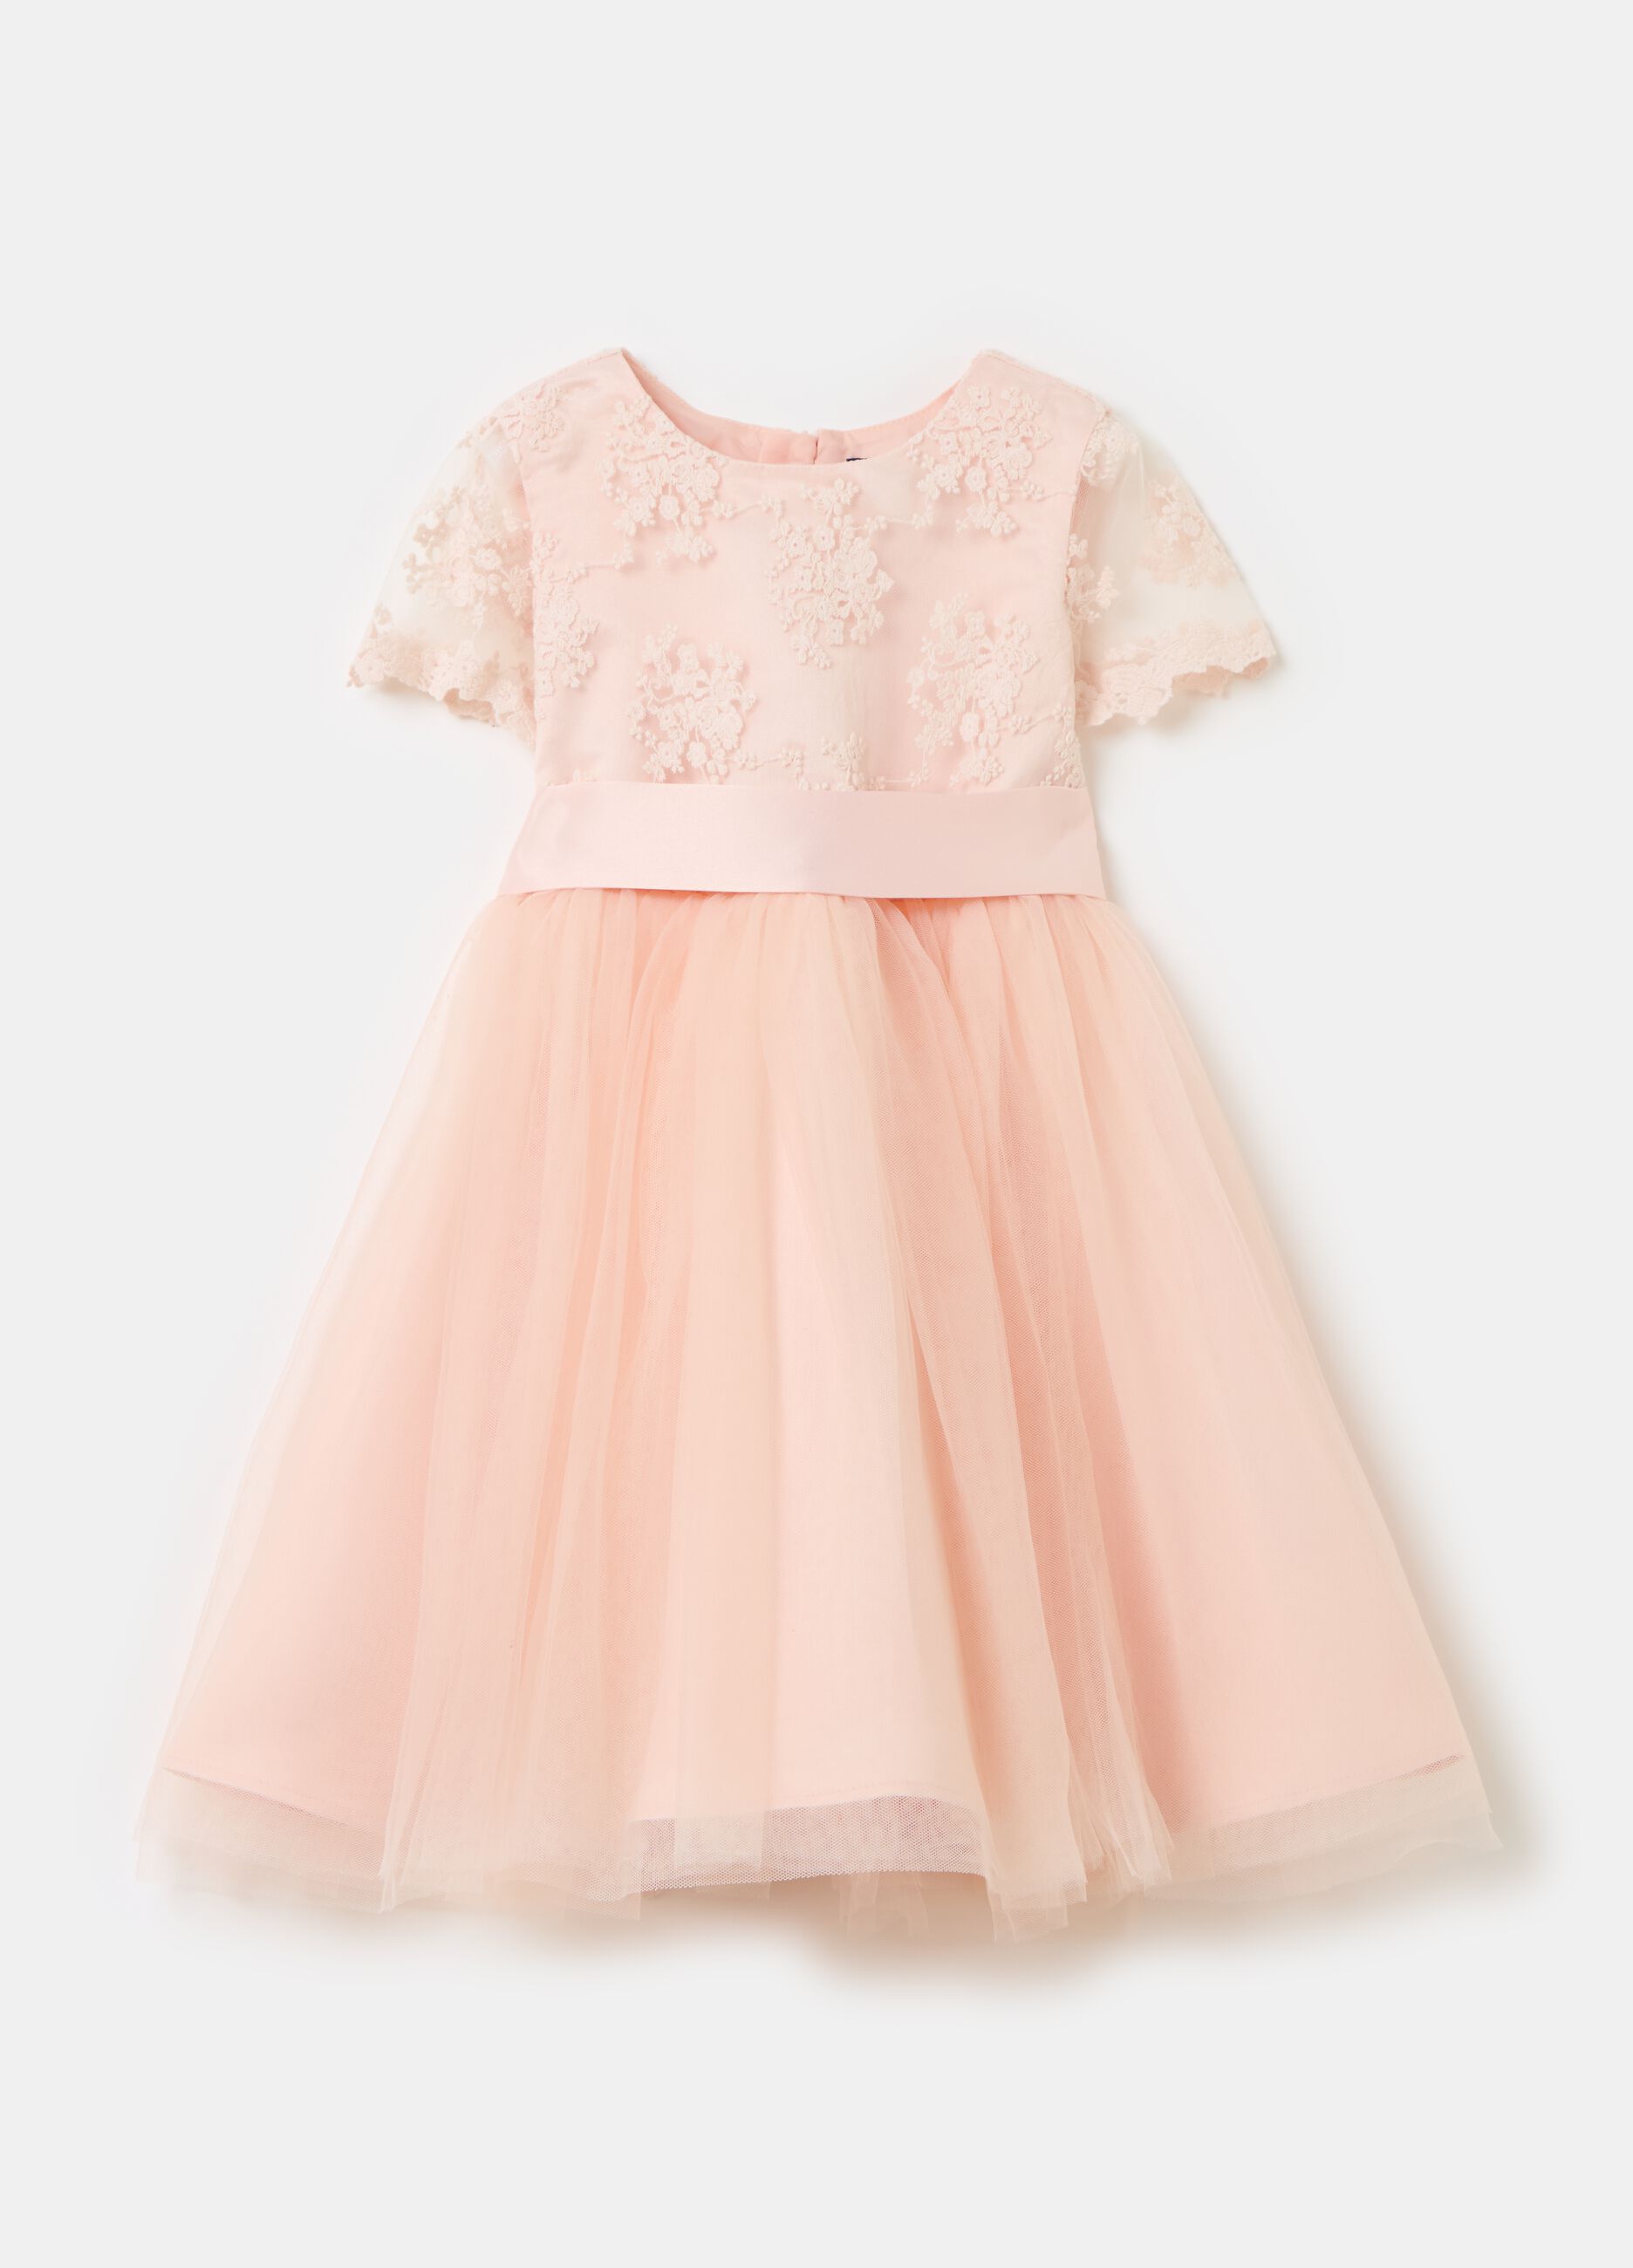 Tulle dress with lace inserts